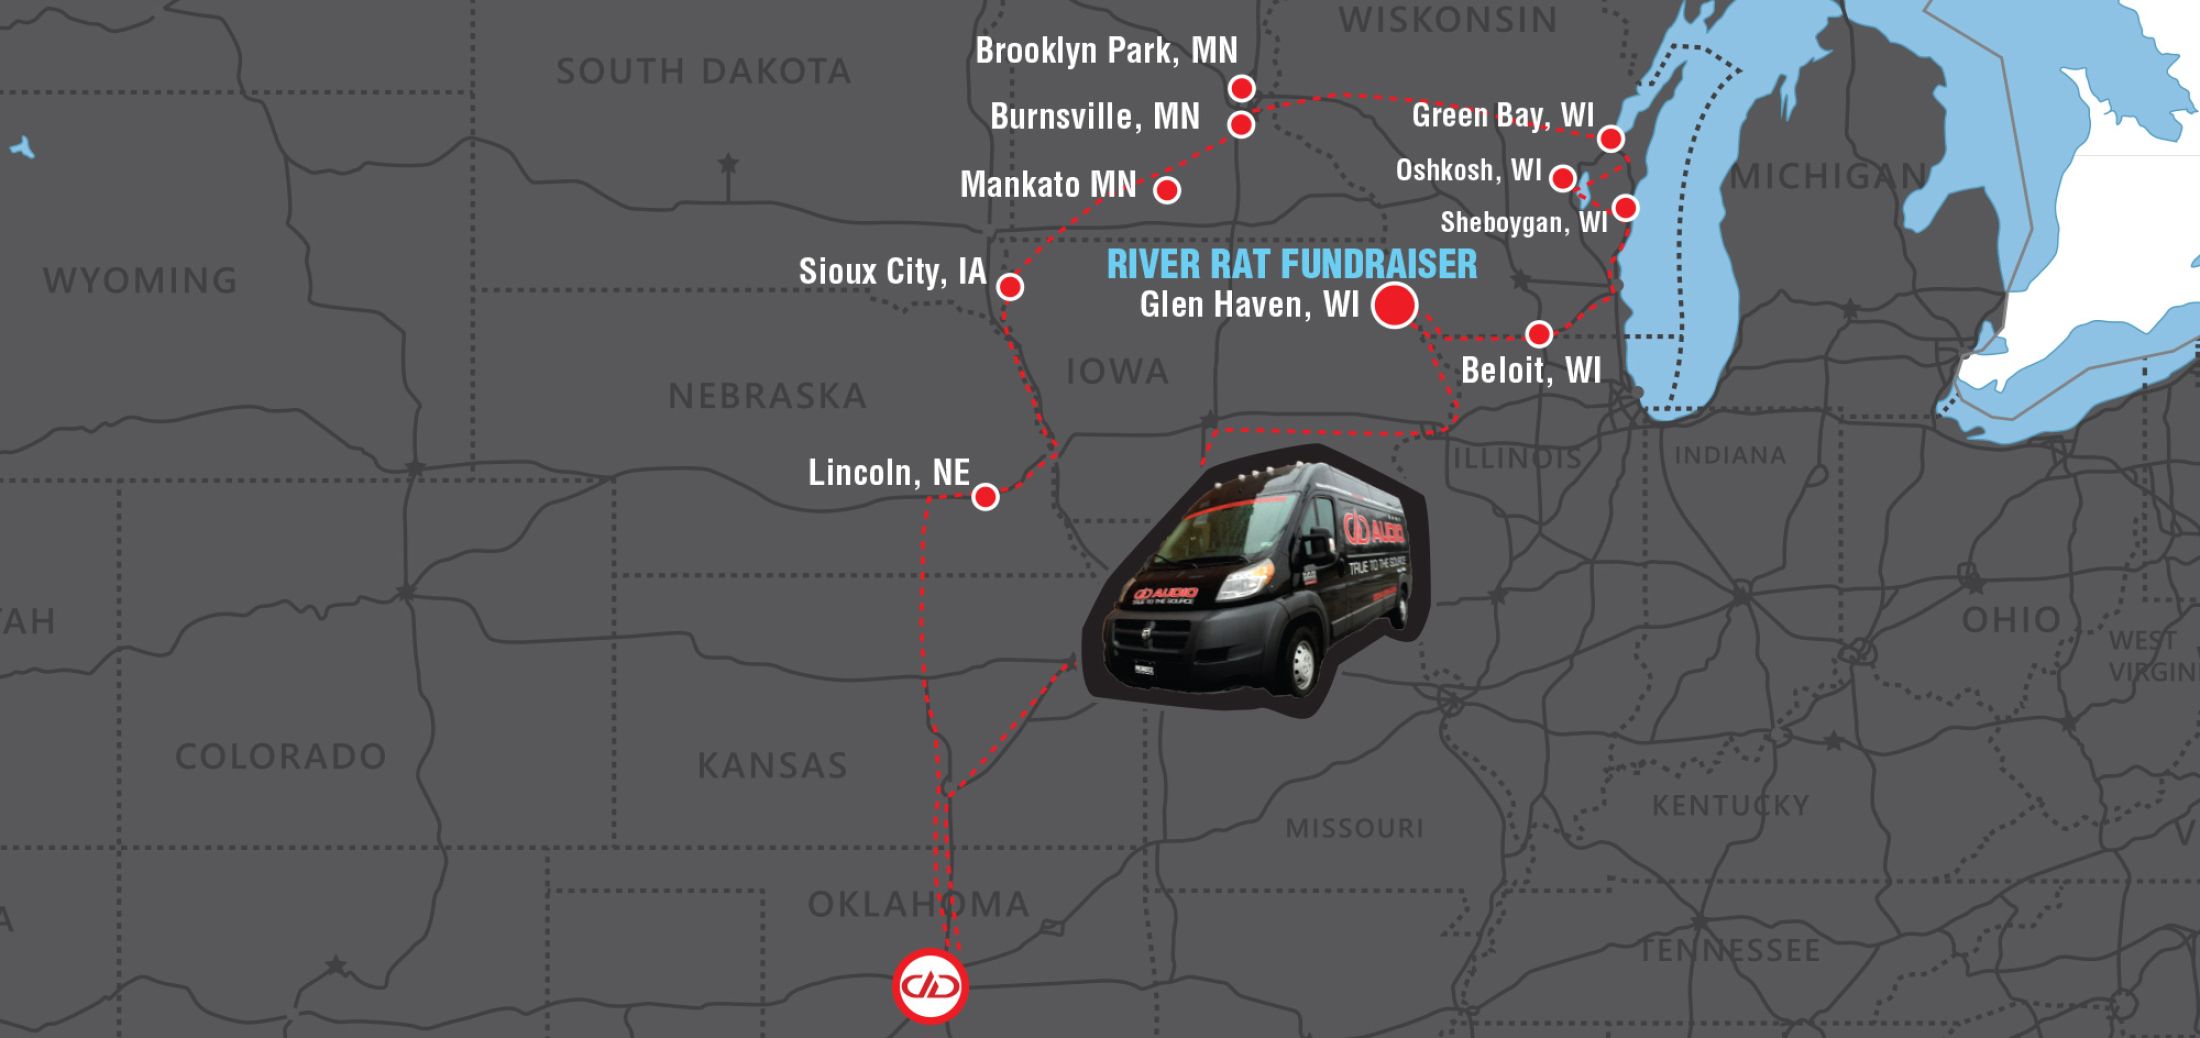 The DD Work Van is Headed North - cover